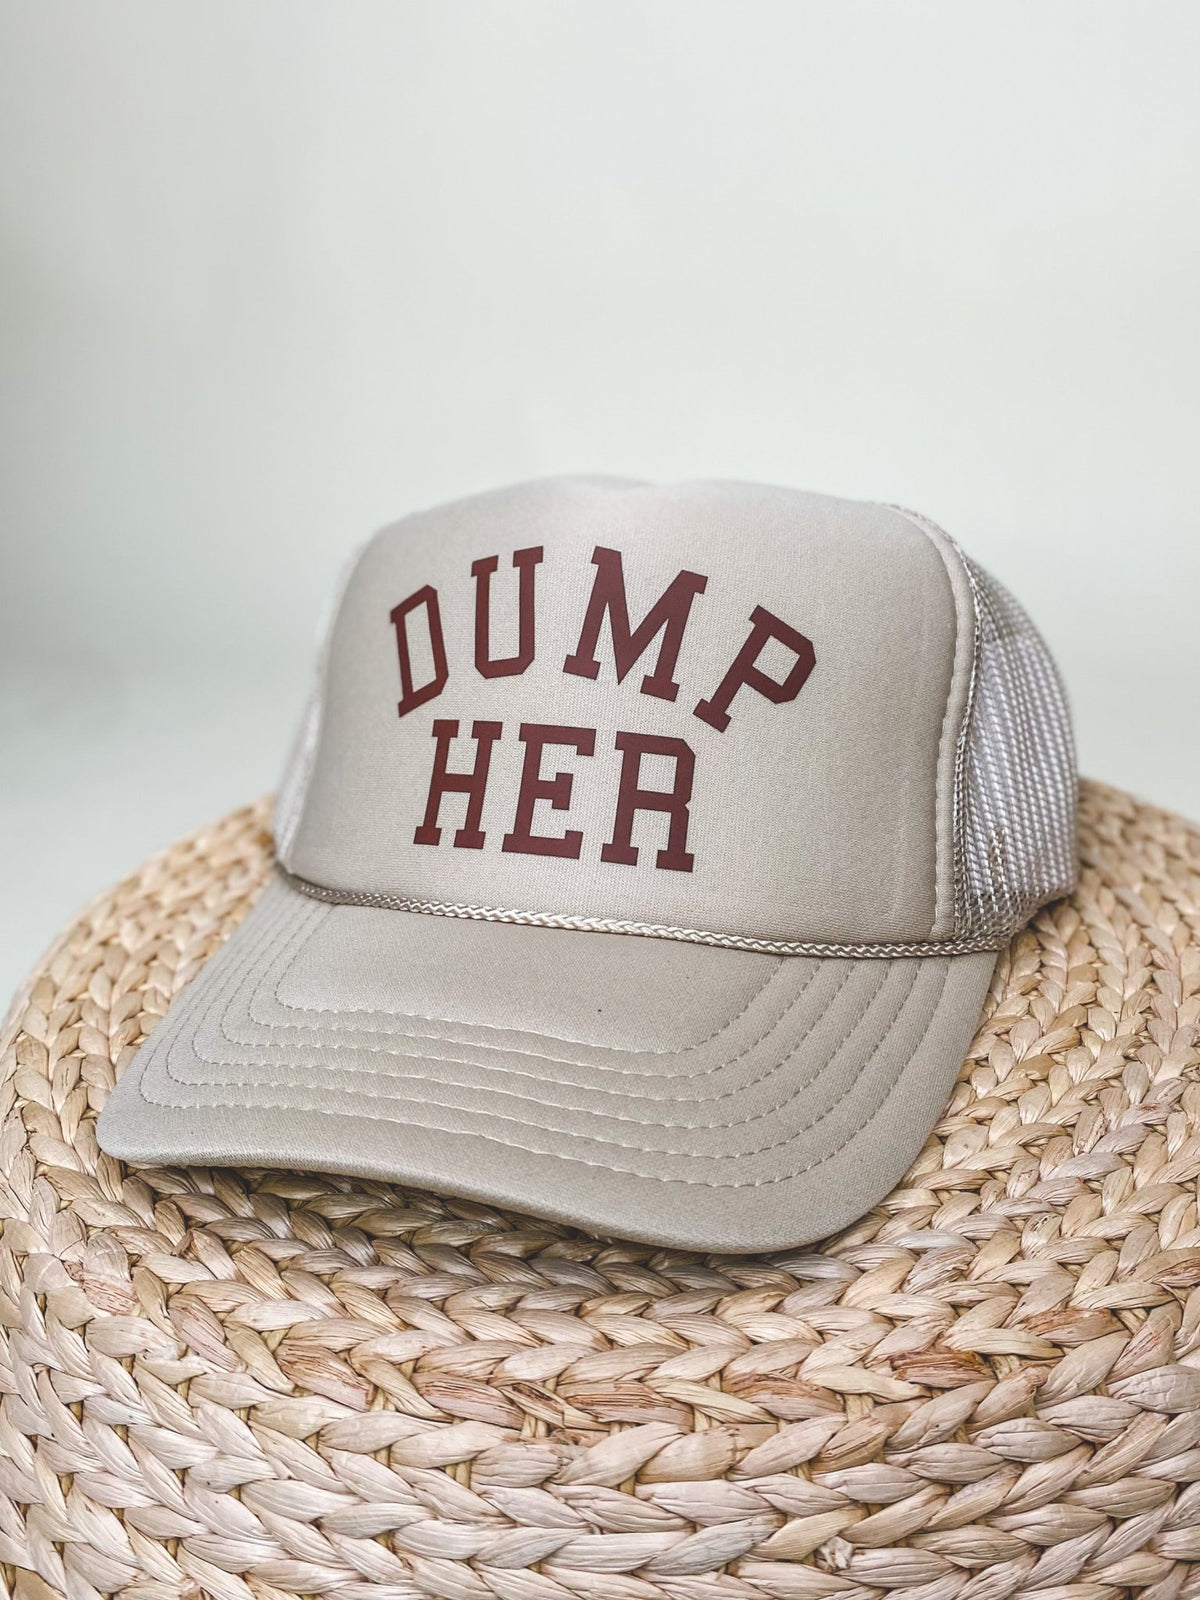 Dump her trucker hat khaki - Trendy T-Shirts for Valentine's Day at Lush Fashion Lounge Boutique in Oklahoma City